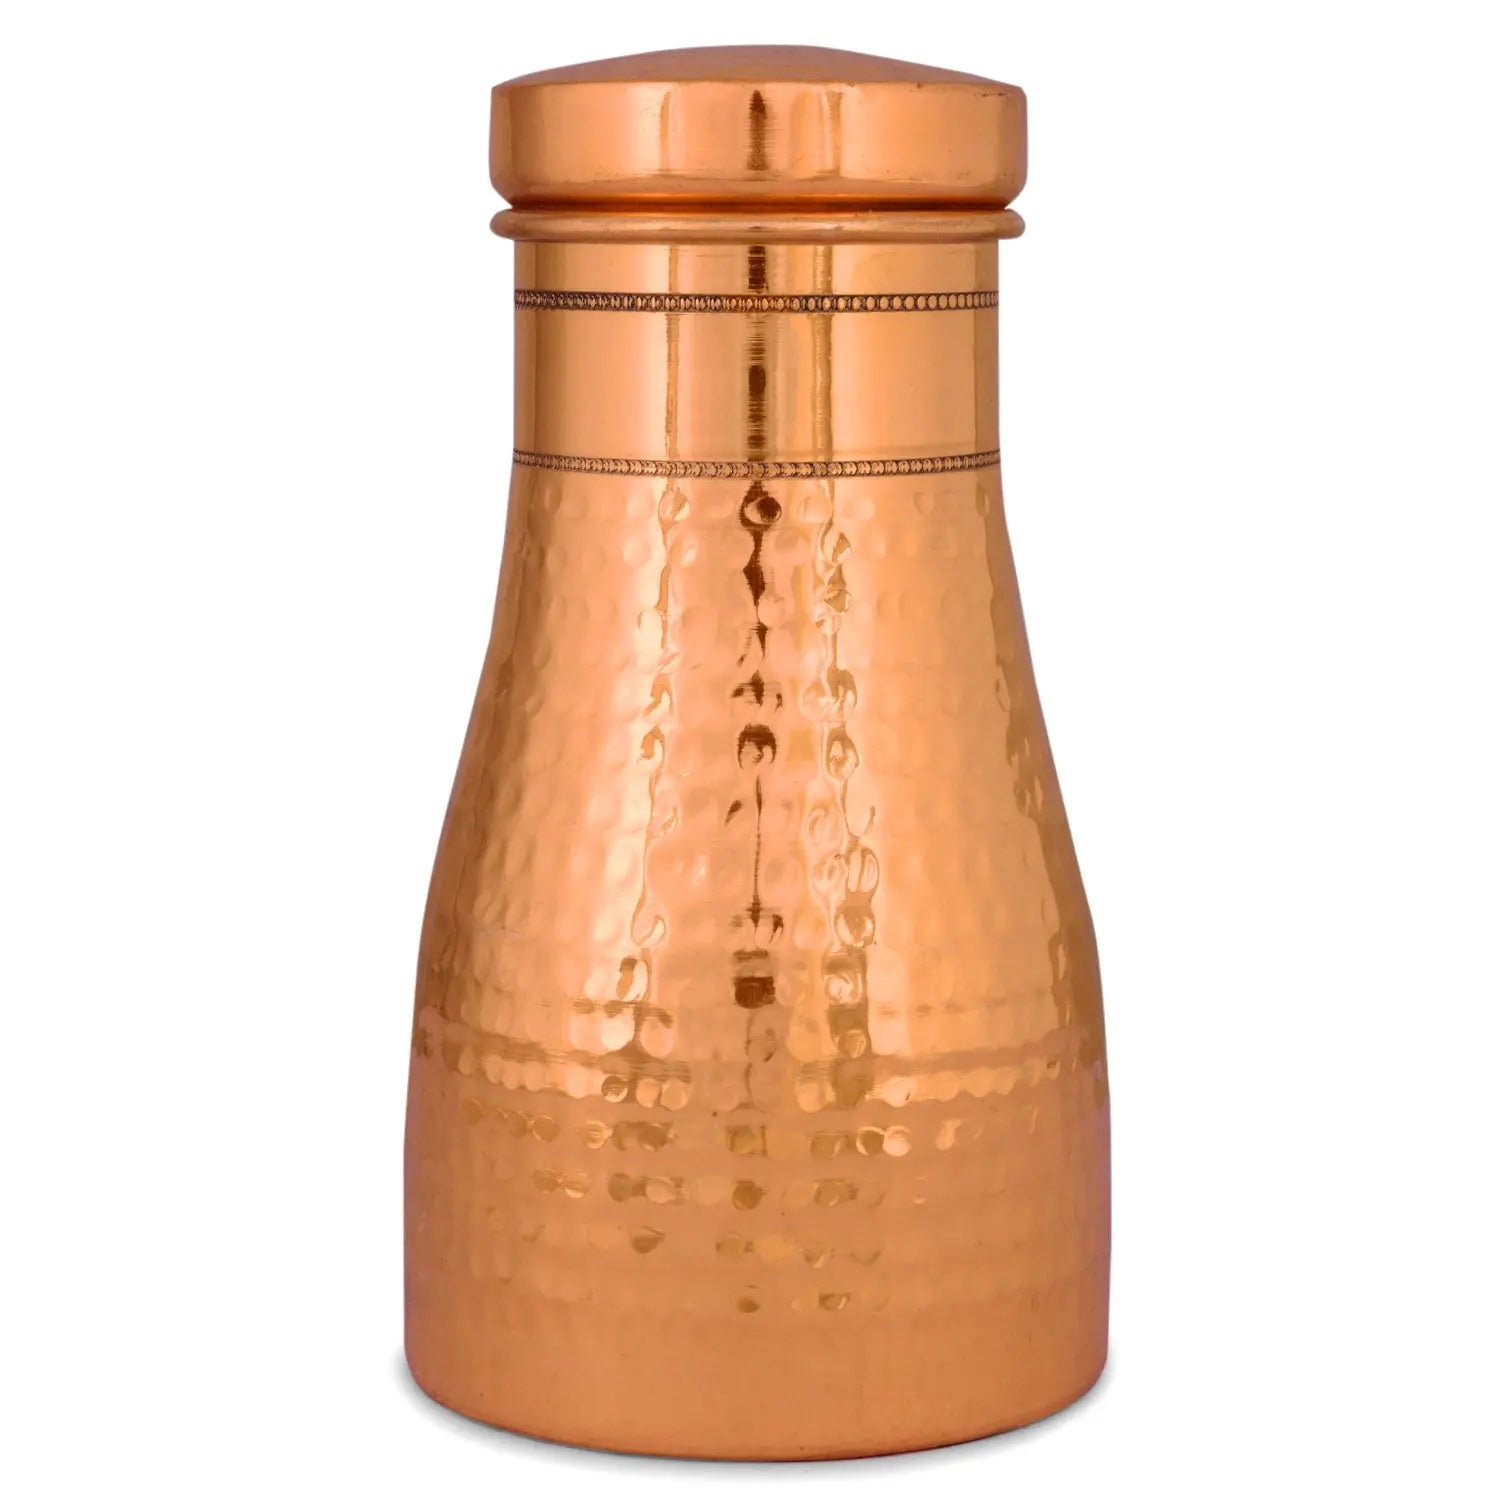 Crockery Wala And Company Bed Side Pure Copper Bottle/Jar 750 Ml - Crockery Wala And Company